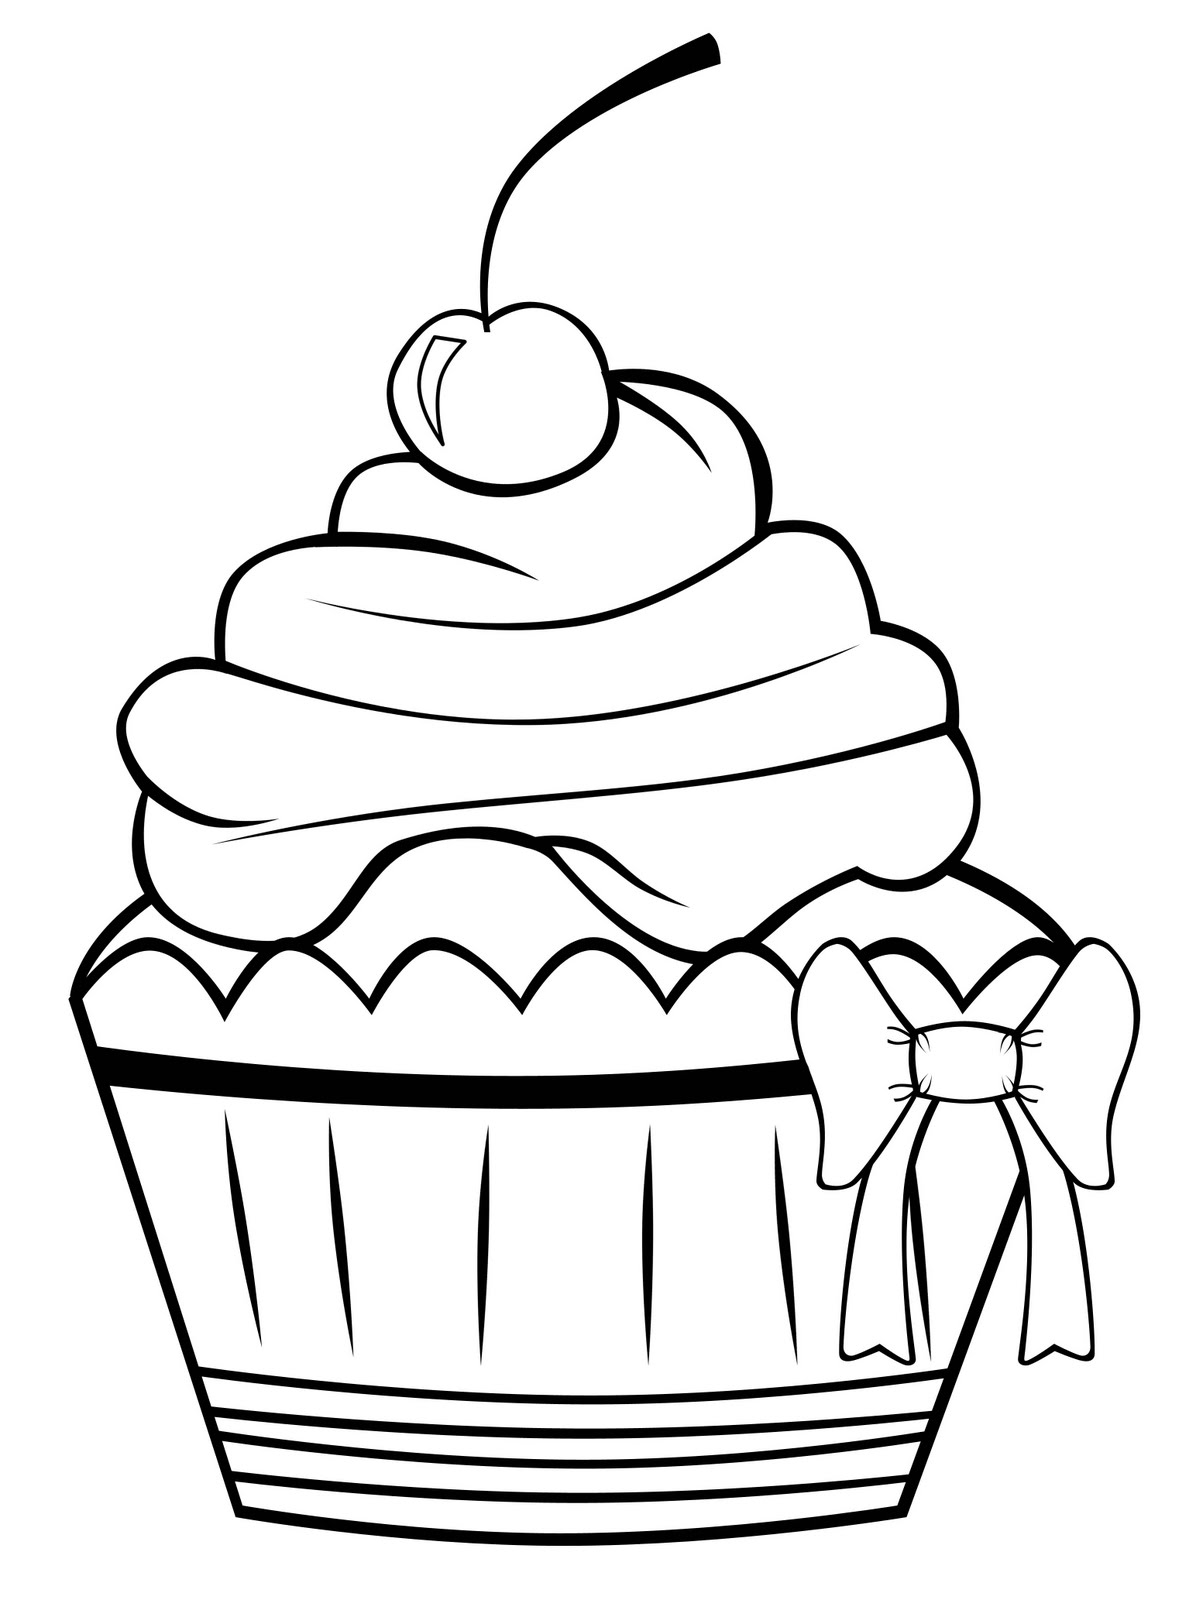 How To Draw A Cupcake | Free Download Clip Art | Free Clip Art ...